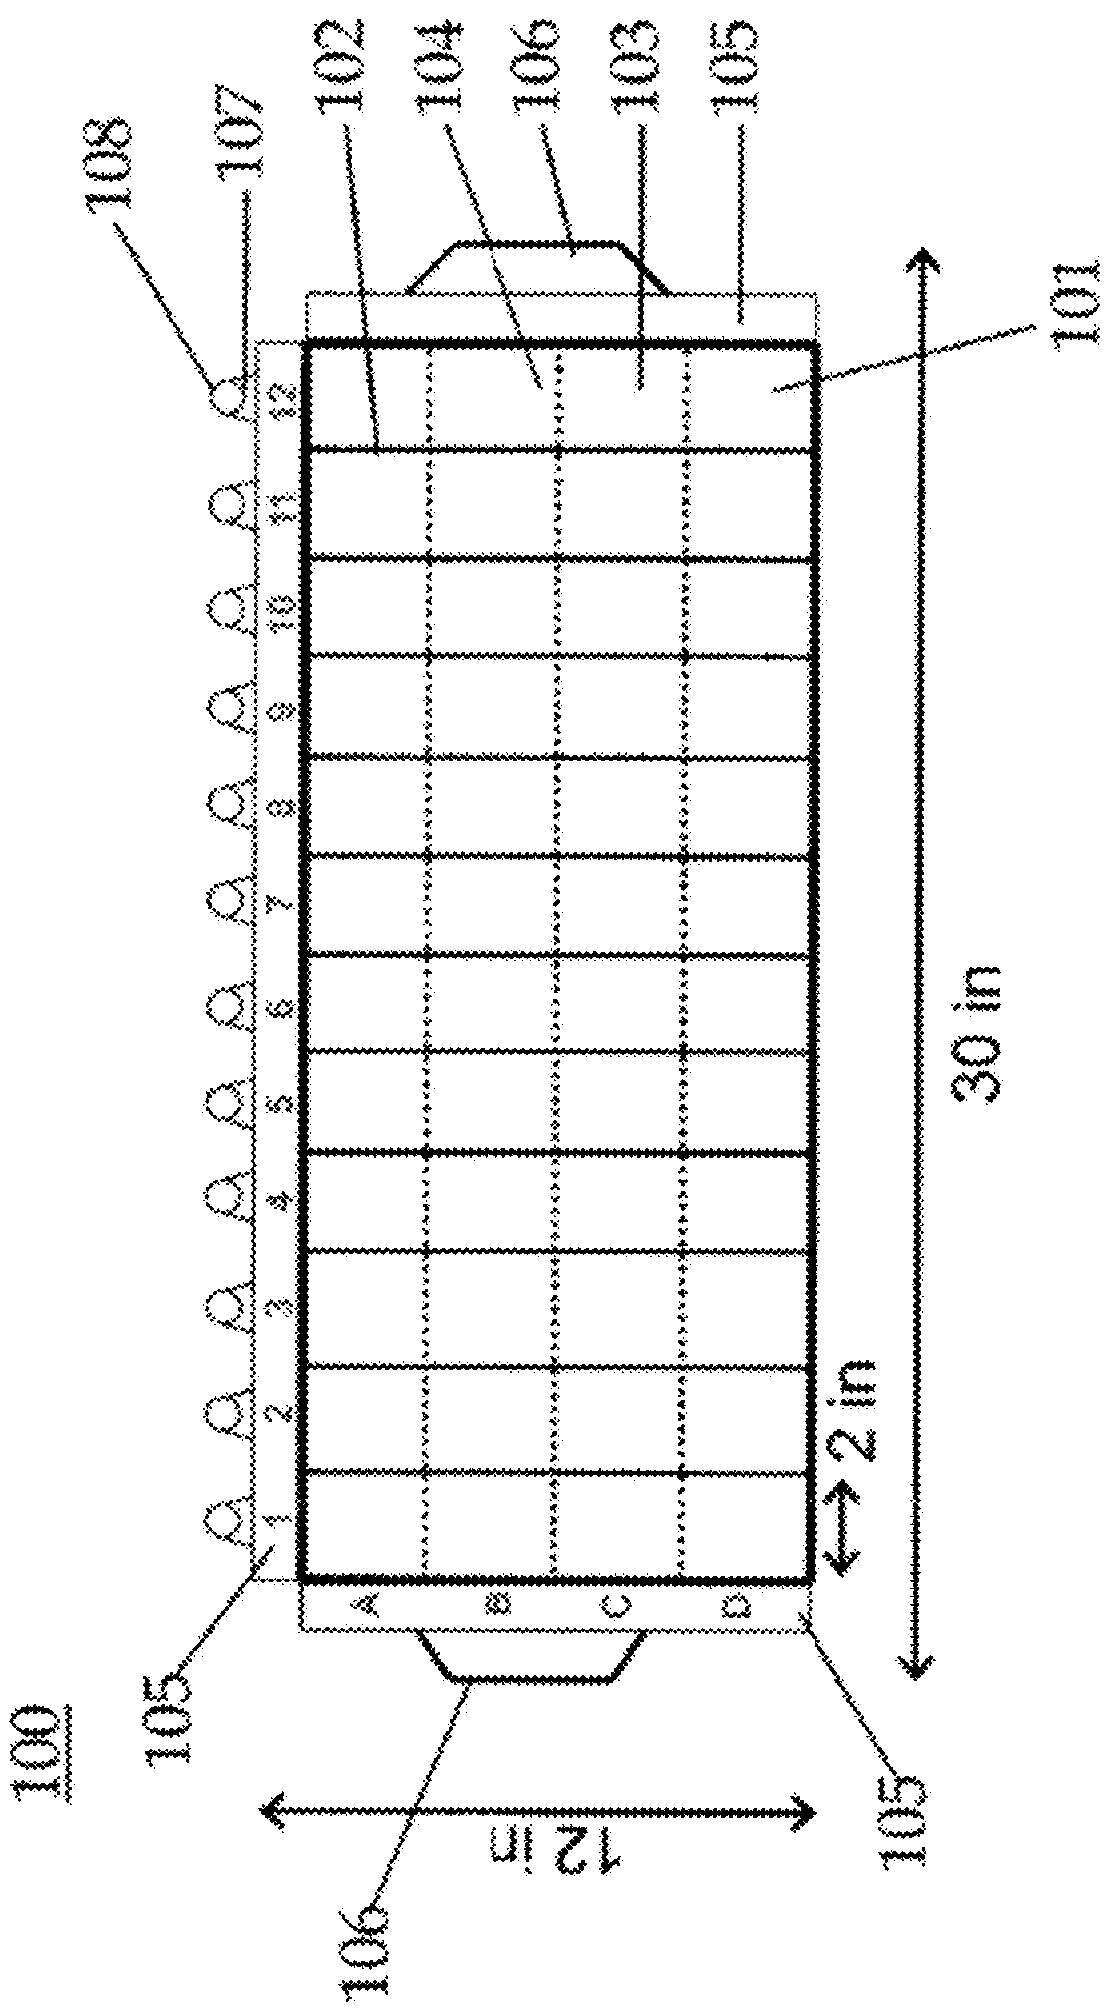 Apparatus and method for research and testing of small aquatic species